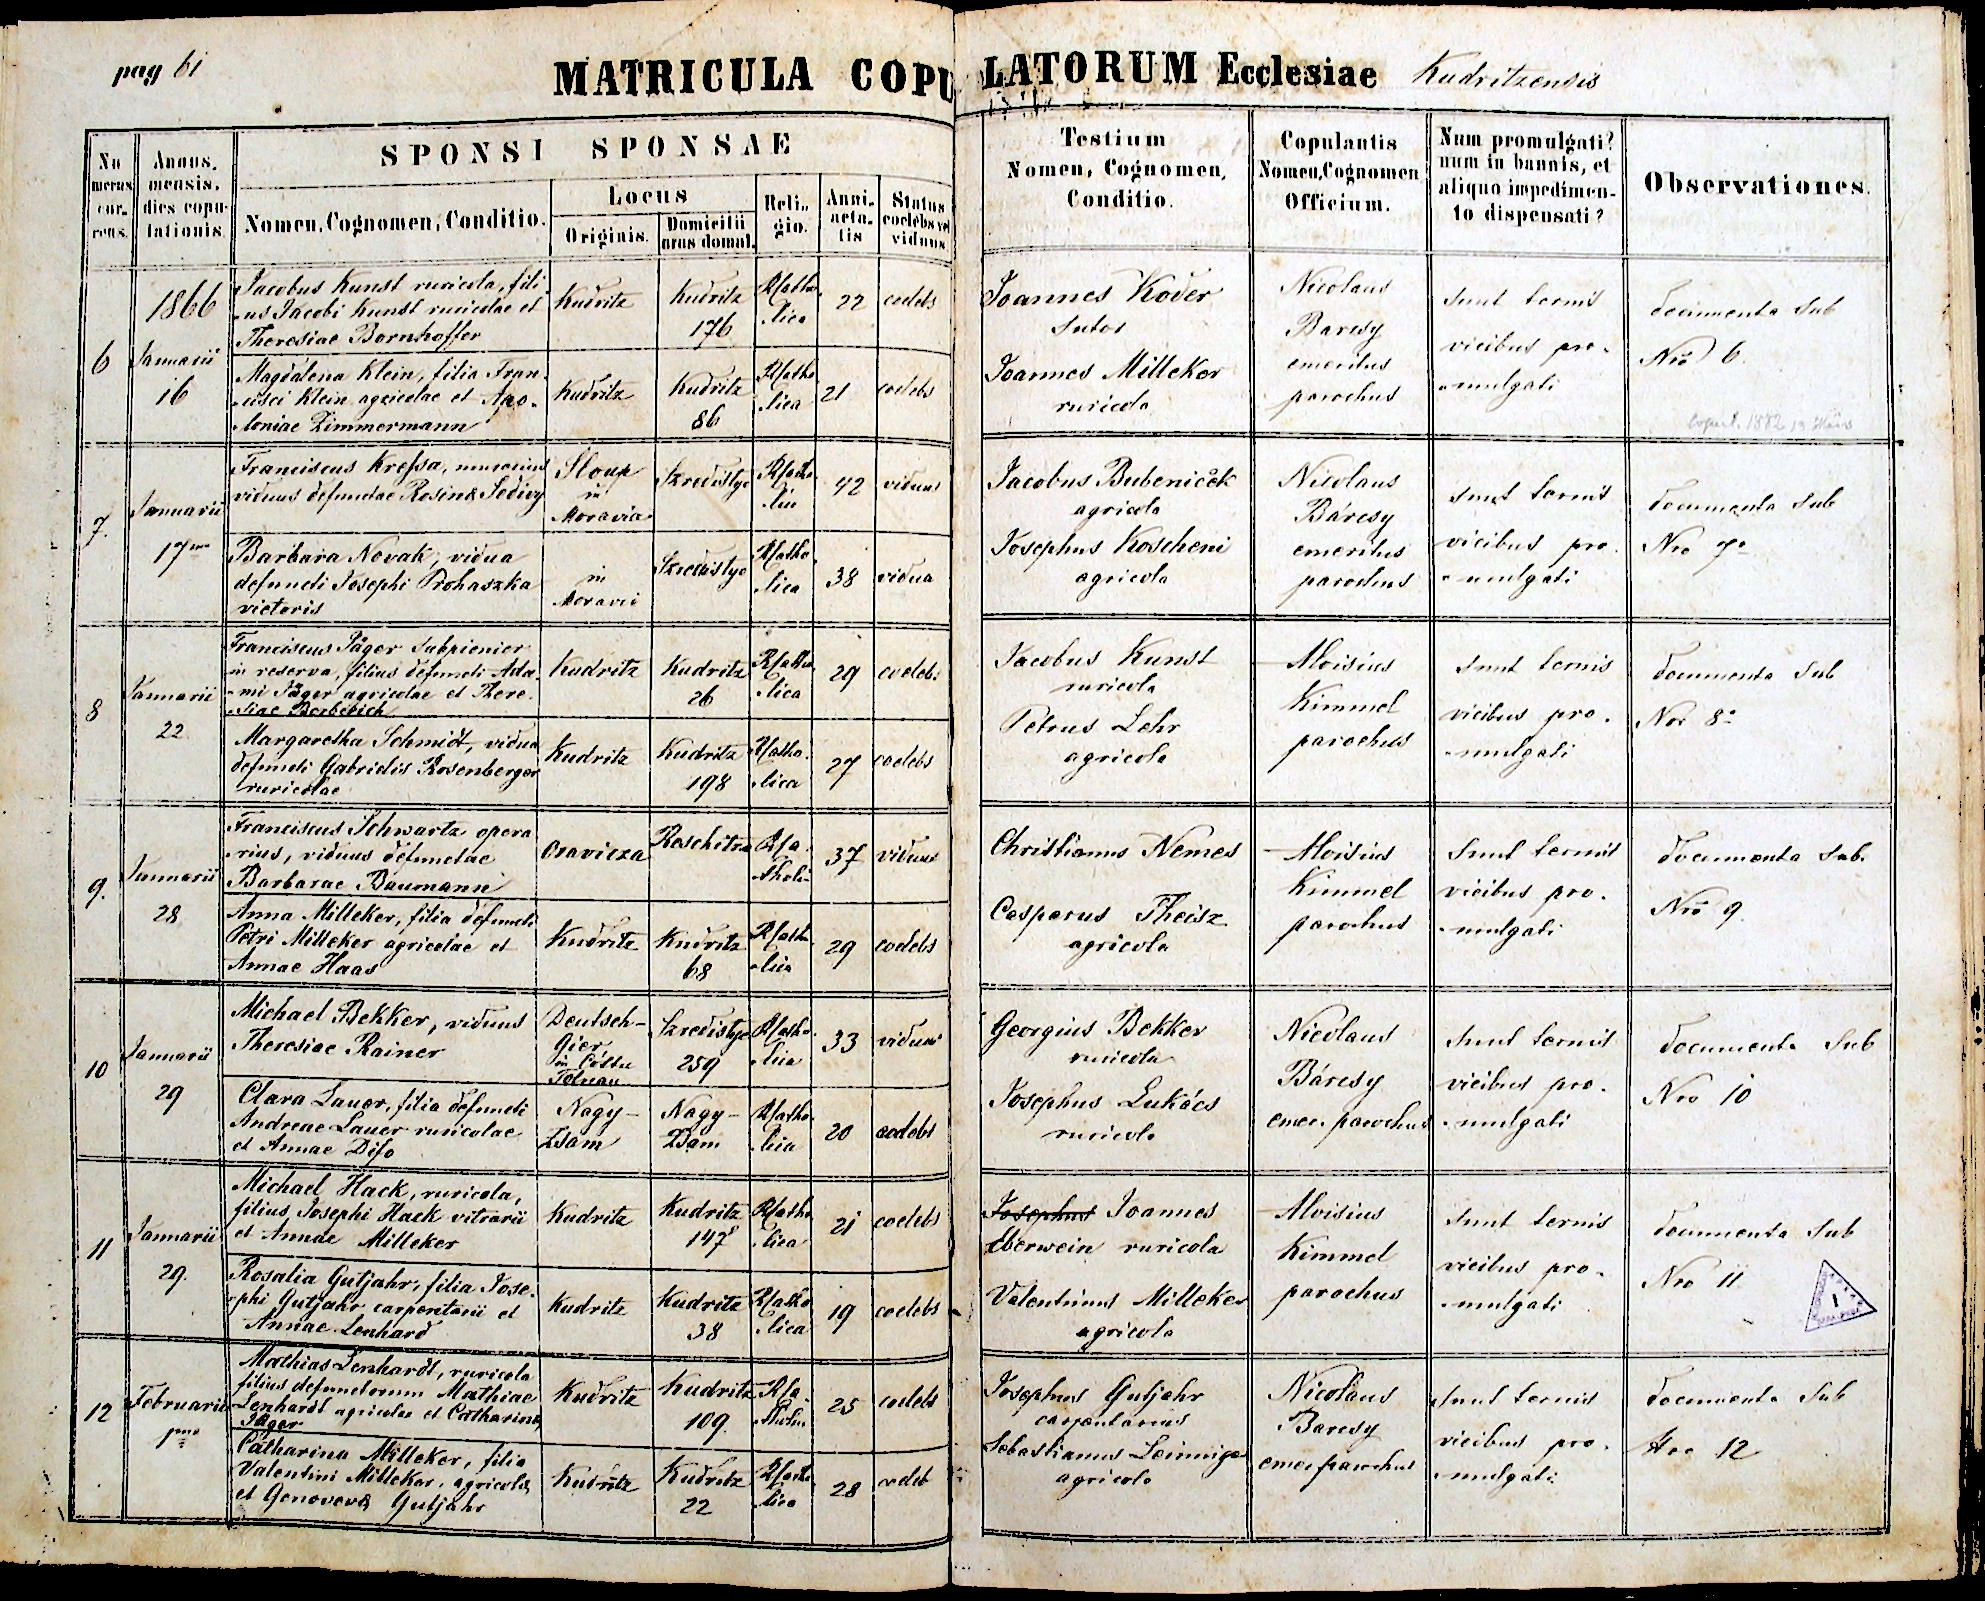 images/church_records/MARRIAGES/1871-1890M/061